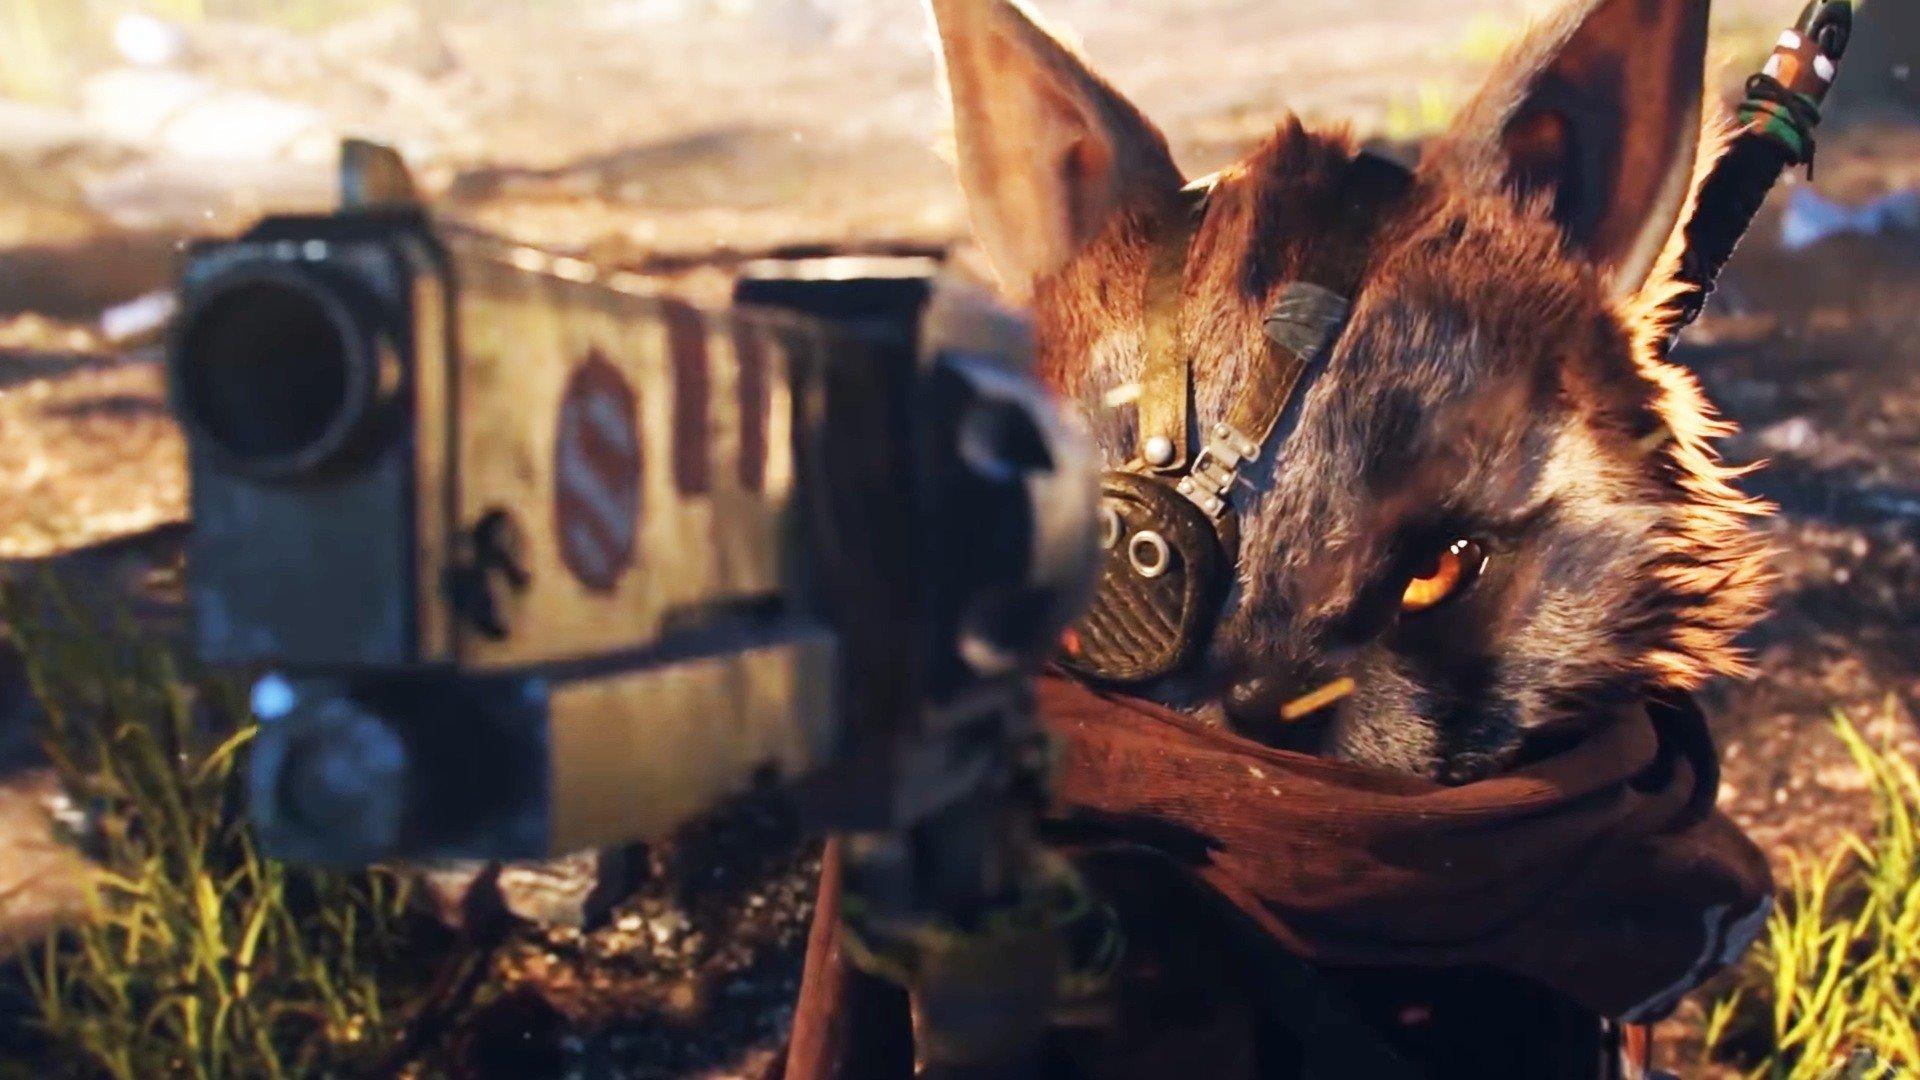 11 Minutes of BioMutant Gameplay.